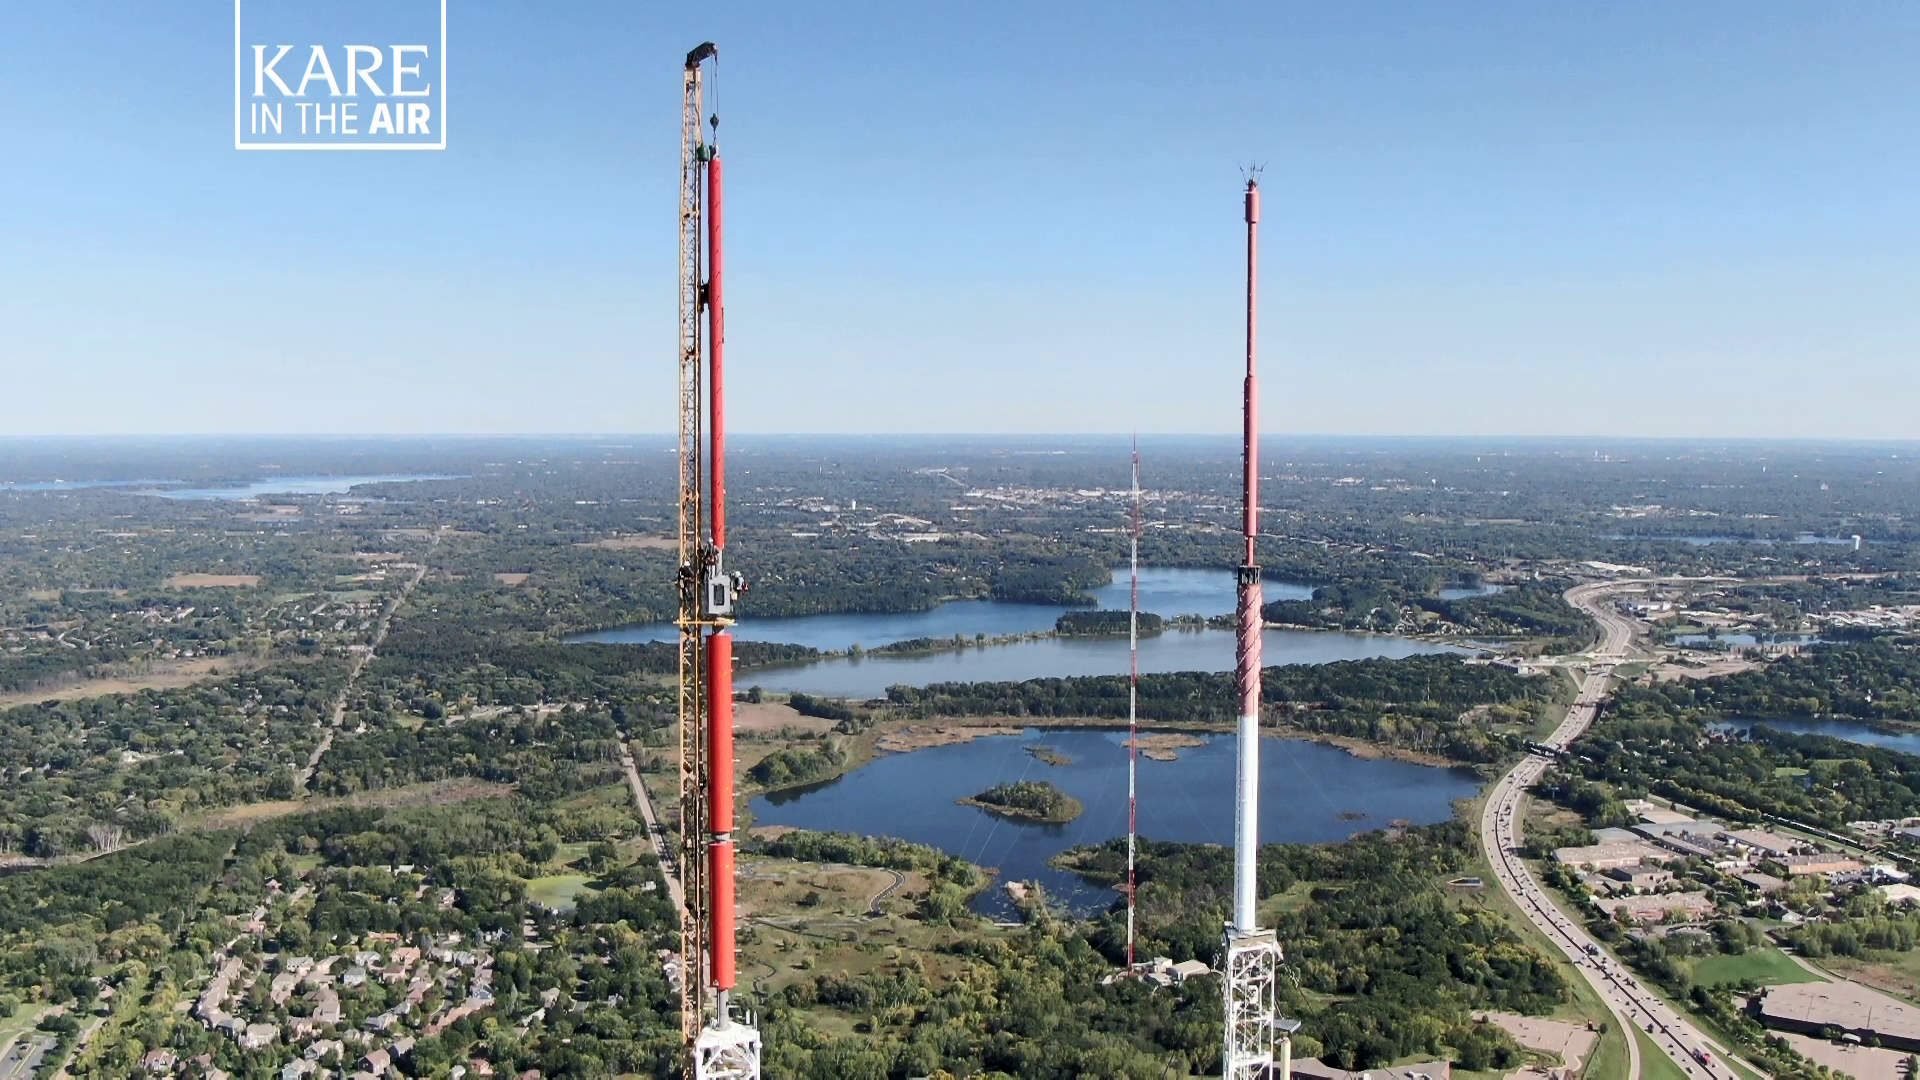 Our KARE in the Air drone series takes us to Shoreview, for a unique bird's-eye view of workers high above the ground at KARE 11's antenna transmitter site.